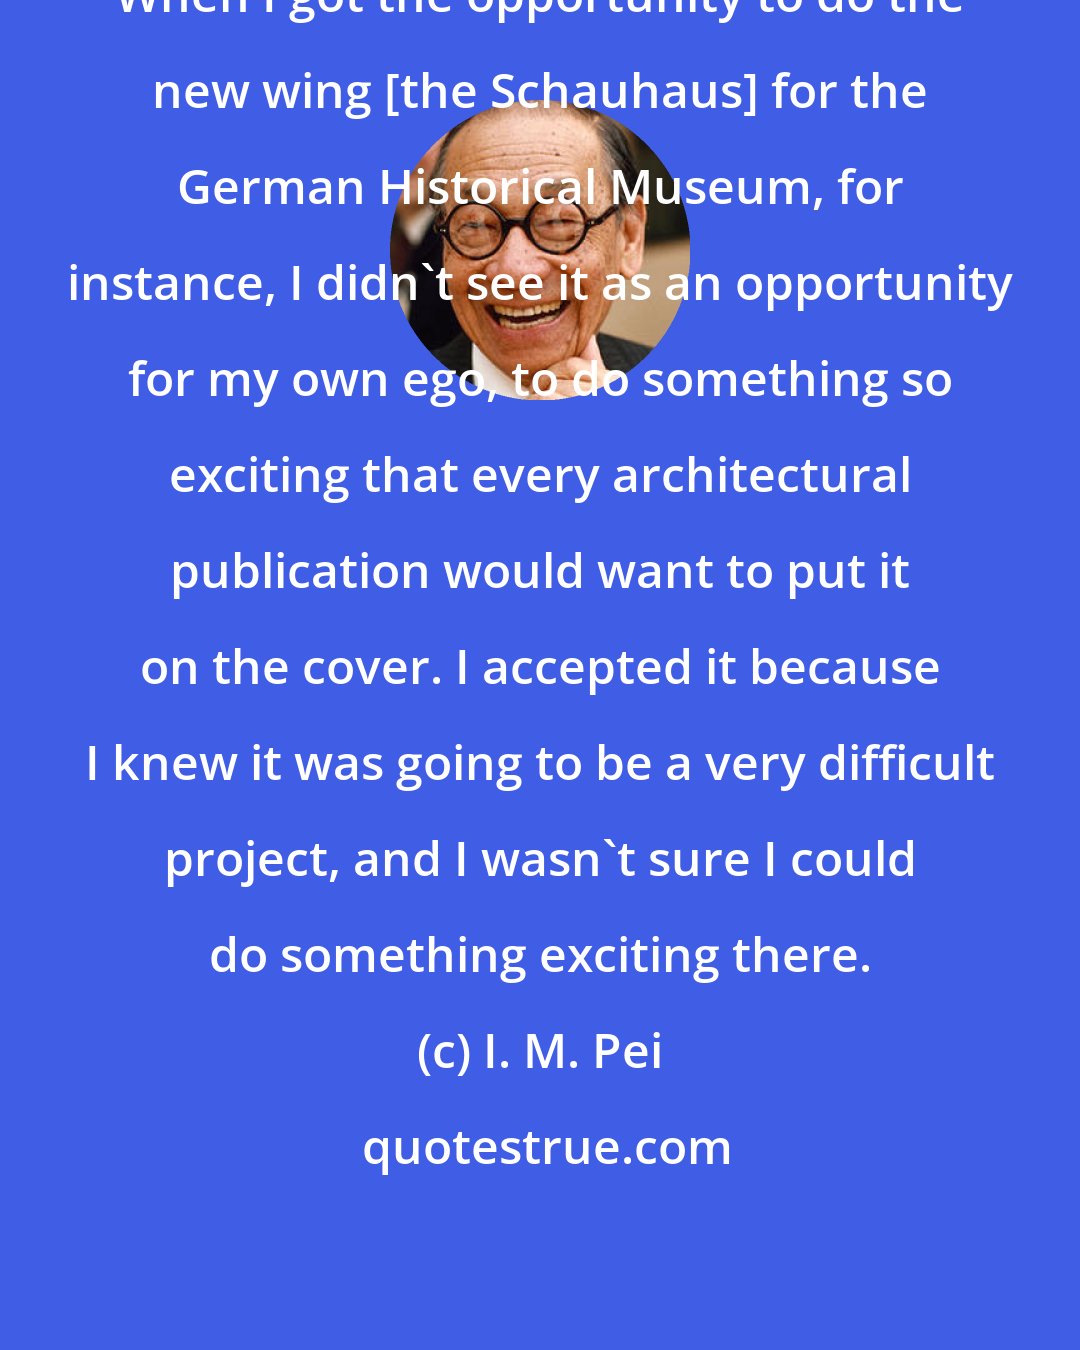 I. M. Pei: When I got the opportunity to do the new wing [the Schauhaus] for the German Historical Museum, for instance, I didn't see it as an opportunity for my own ego, to do something so exciting that every architectural publication would want to put it on the cover. I accepted it because I knew it was going to be a very difficult project, and I wasn't sure I could do something exciting there.